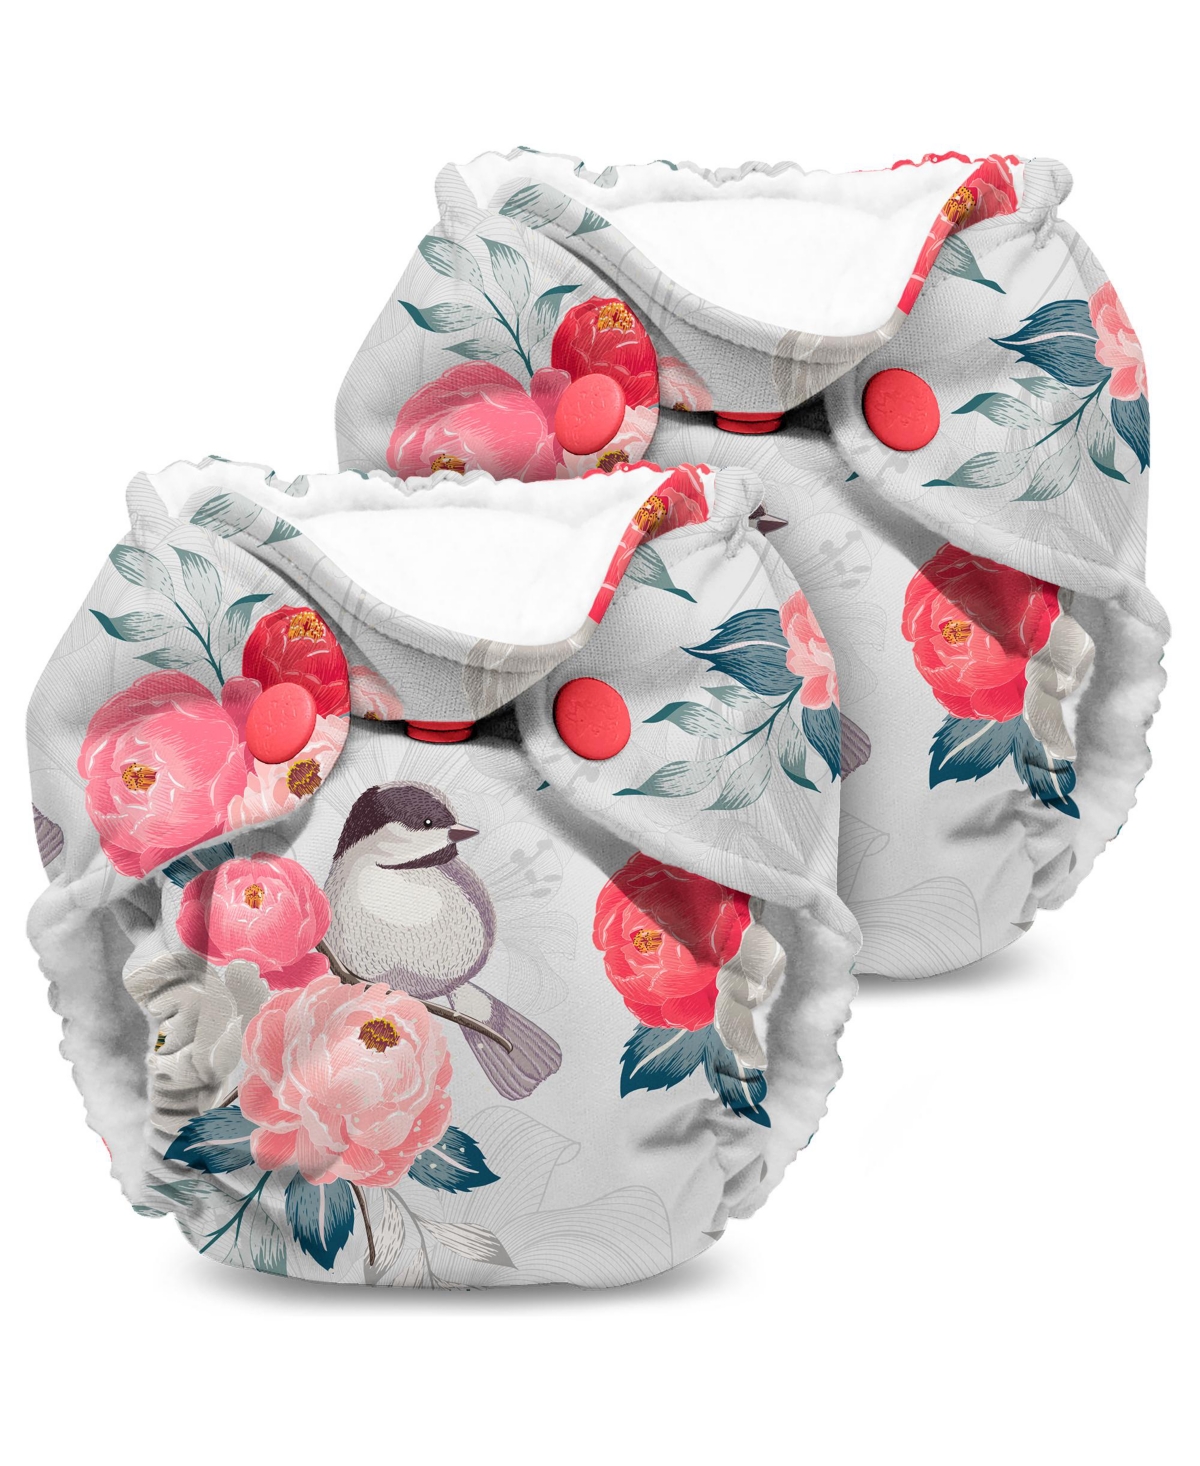 Kanga Care Lil Joey Newborn All In One Aio Cloth Diaper (2pk) In Lily